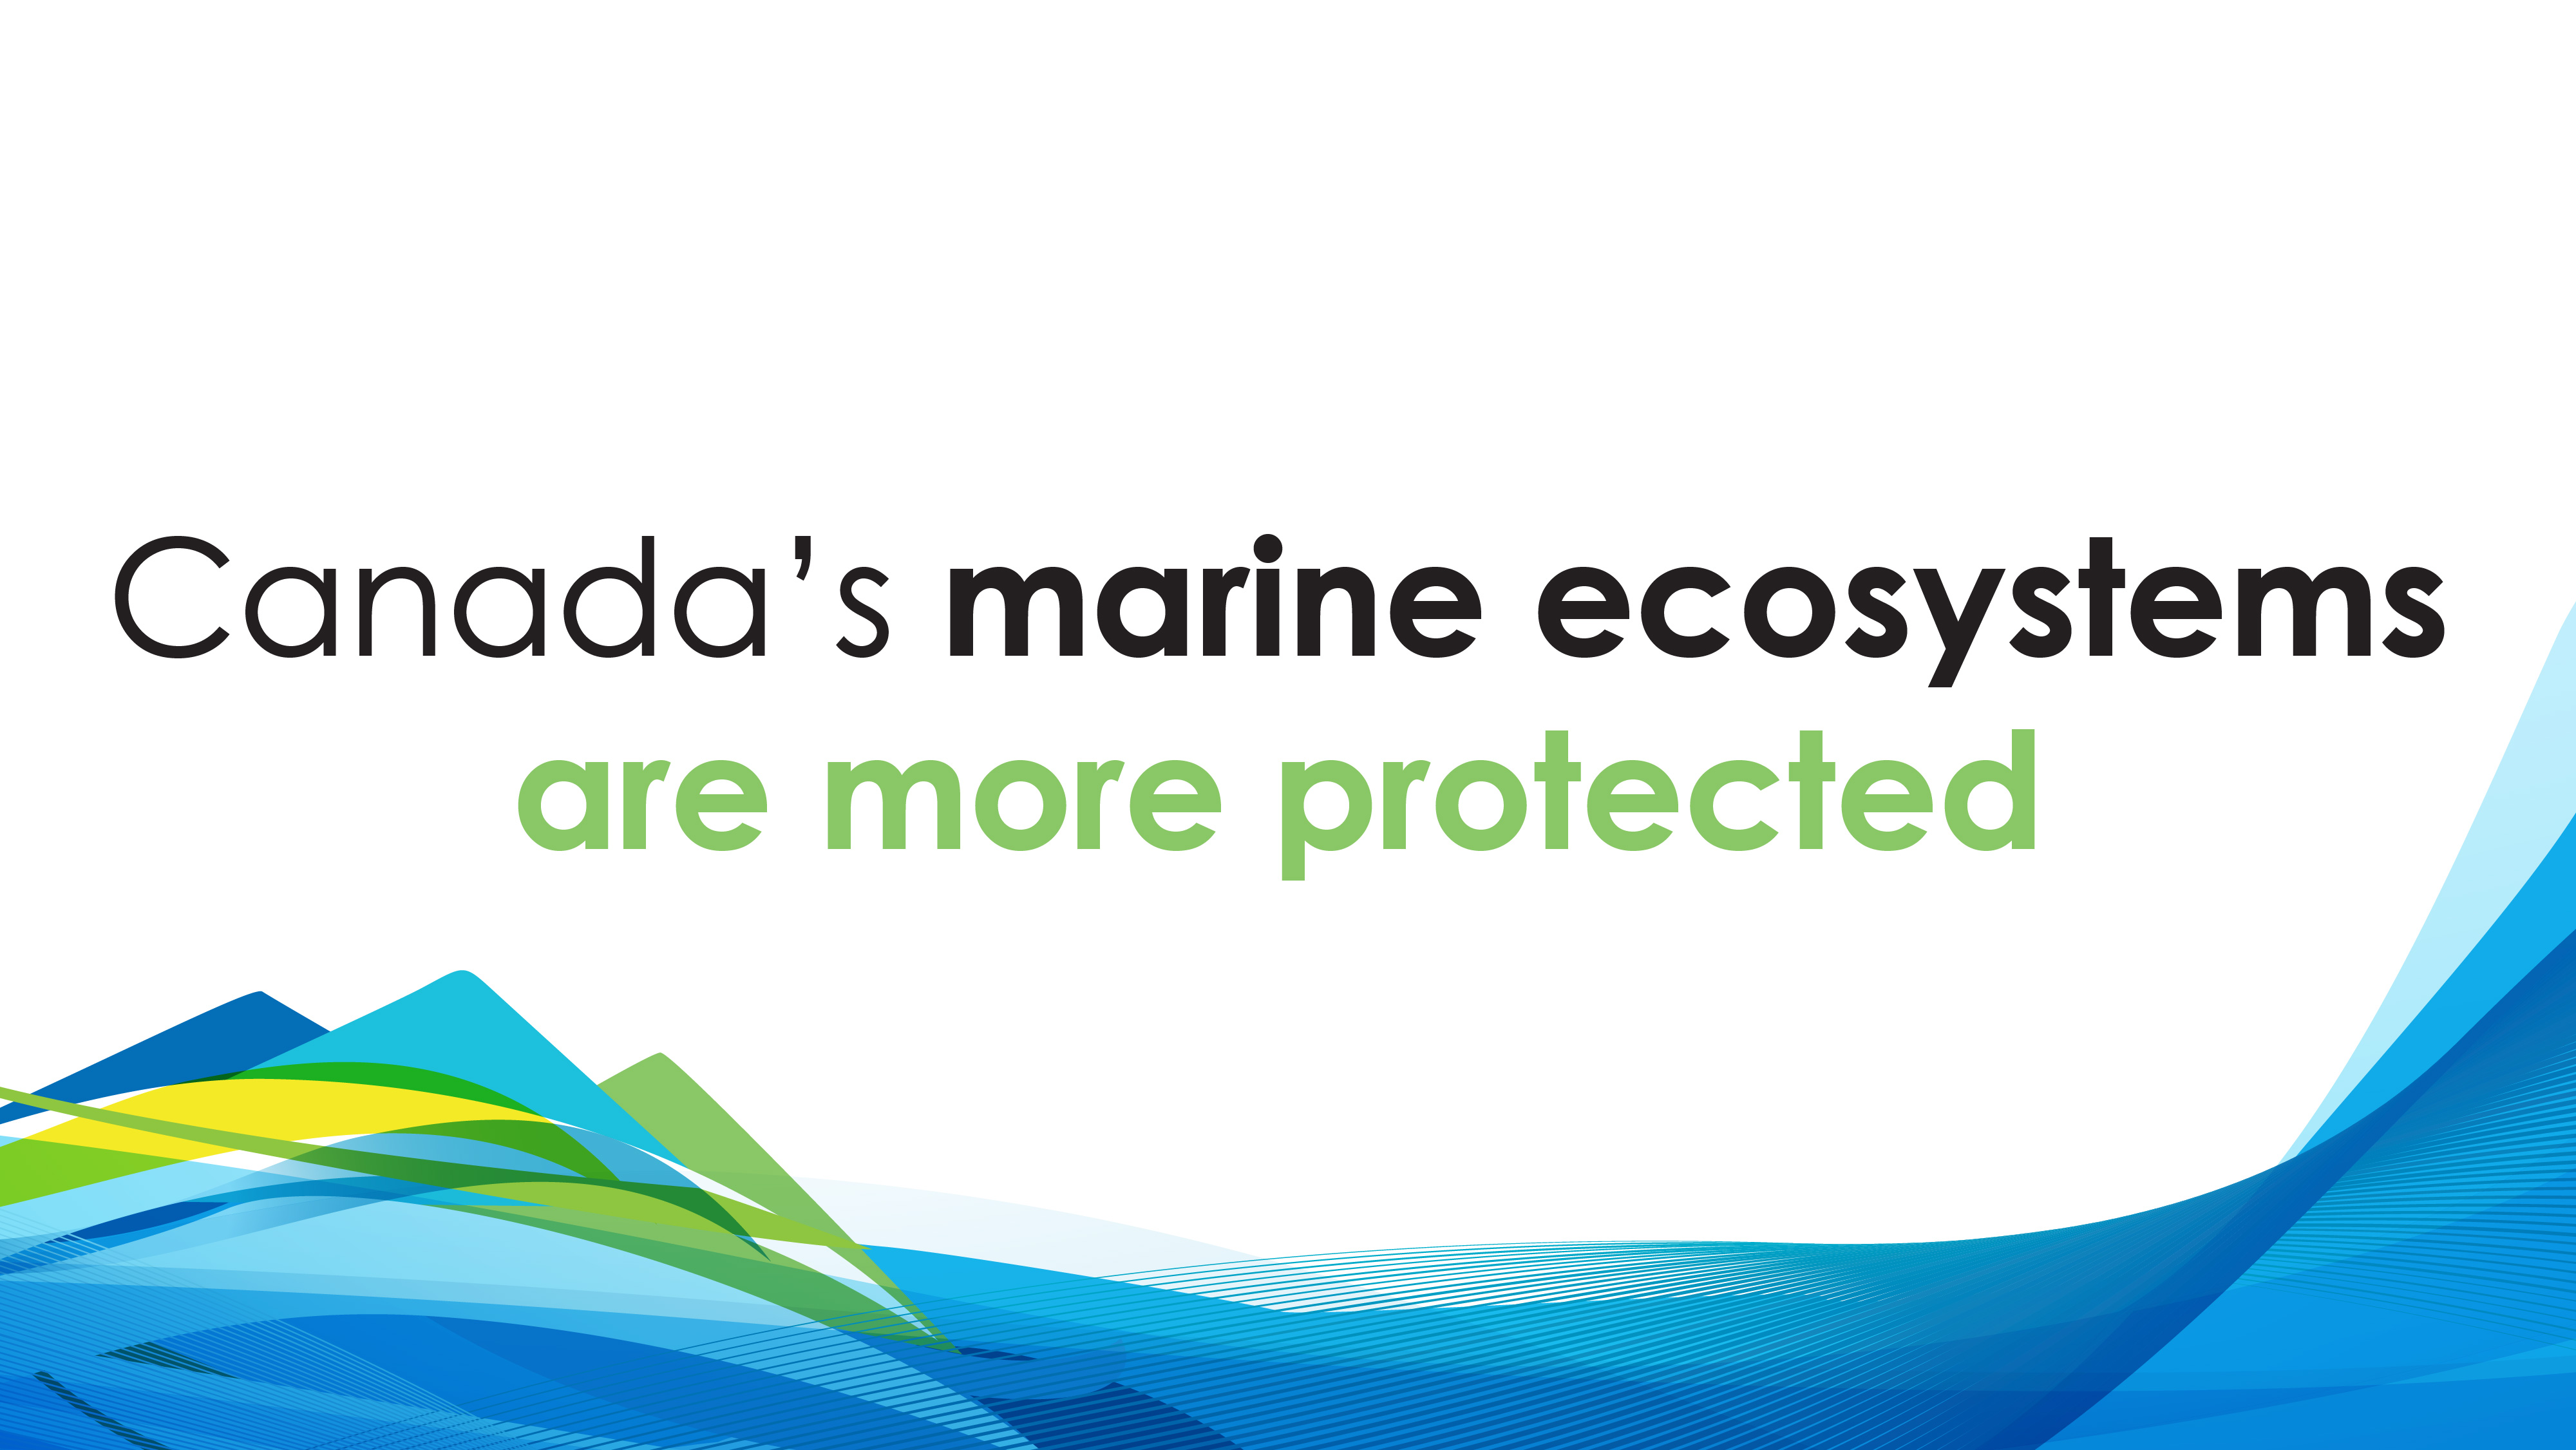 Canada’s marine ecosystems are more protected